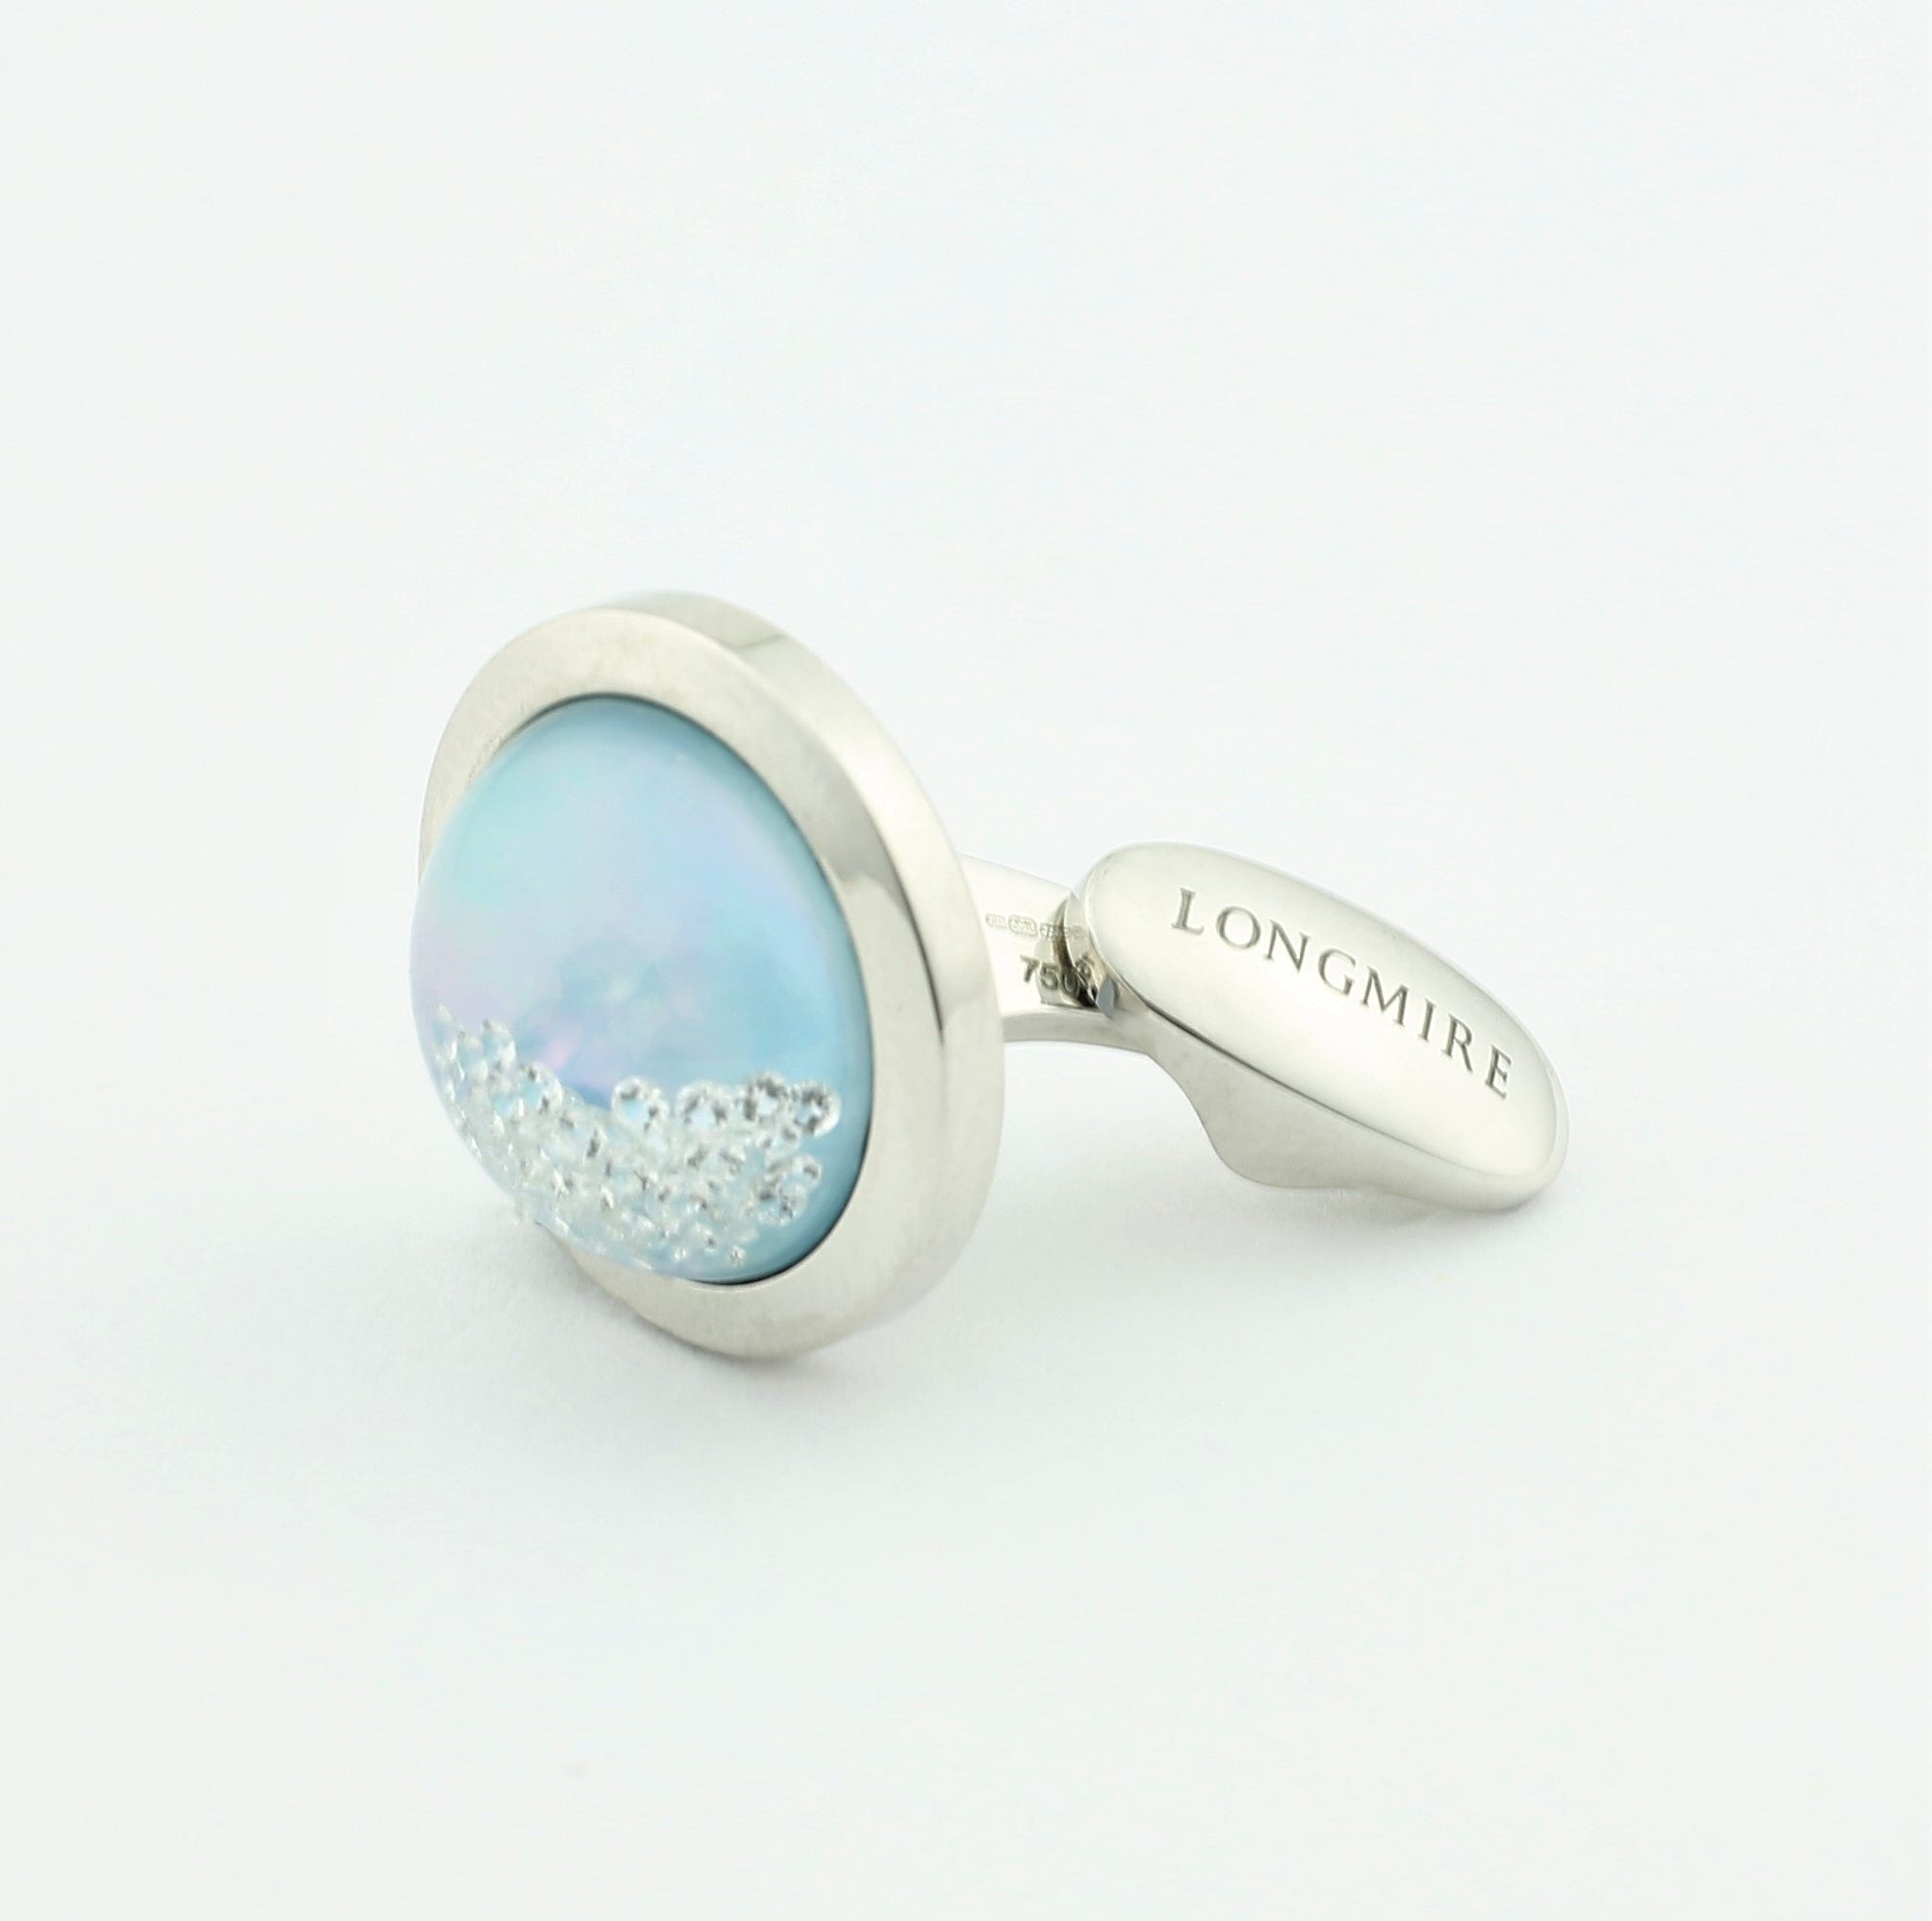 diamonds in the sky - blue mother of pearl - 18ct white gold cufflinks - rear